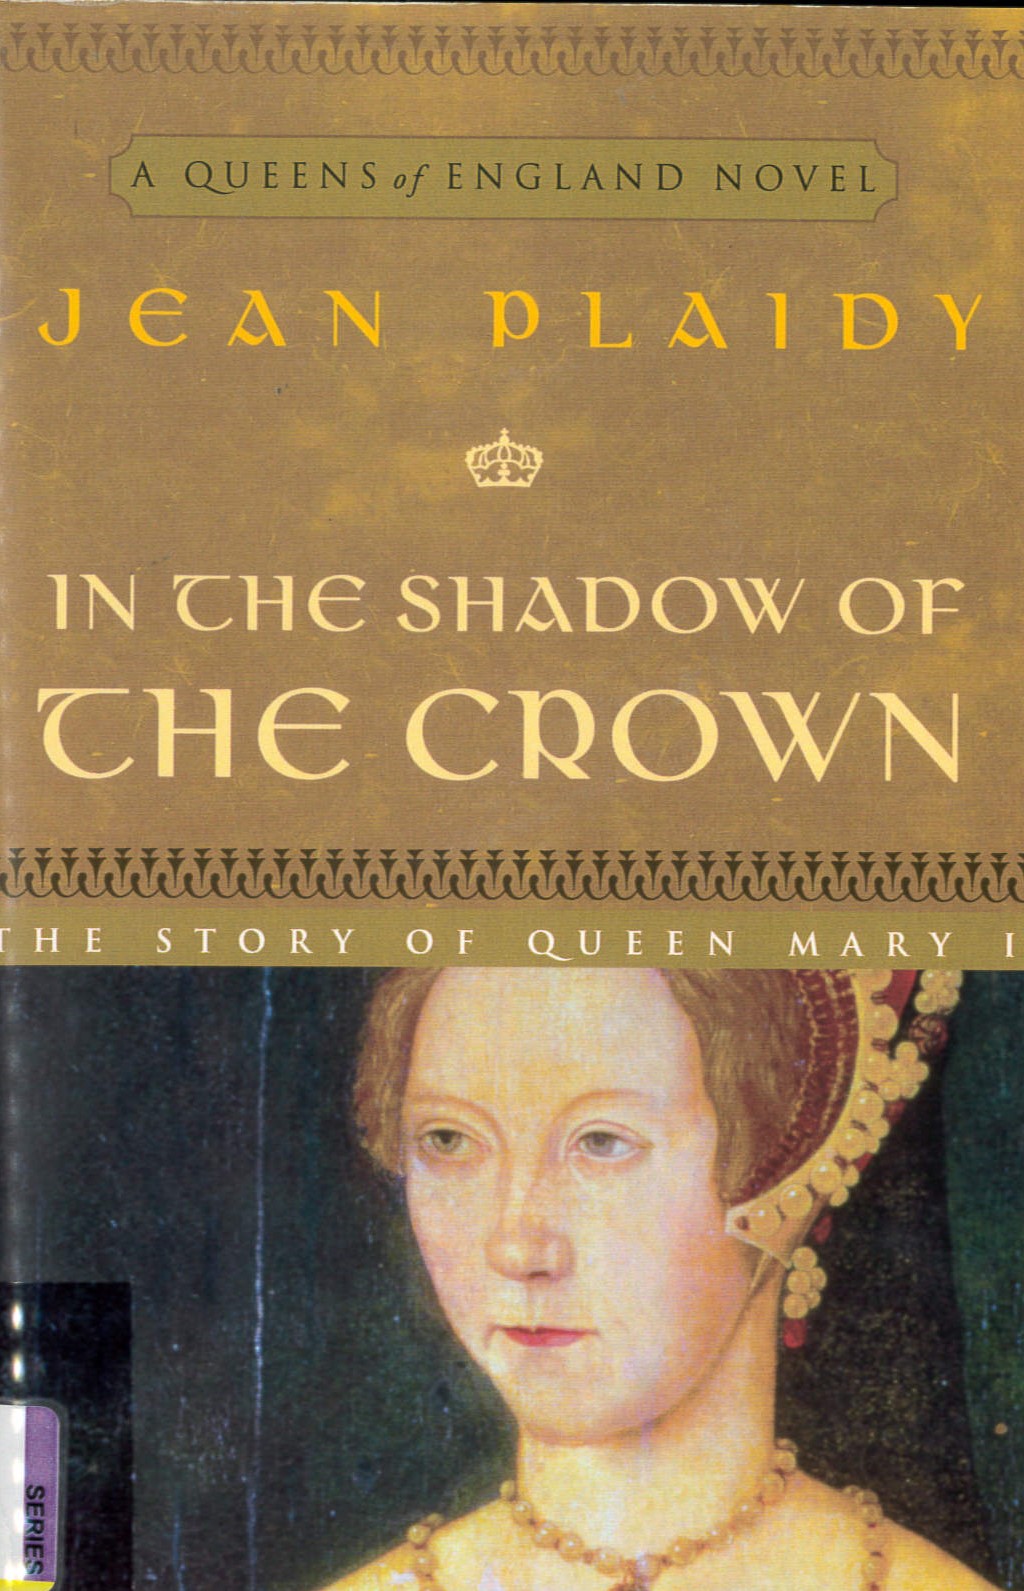 In the shadow of the crown : the story of Queen Mary I/